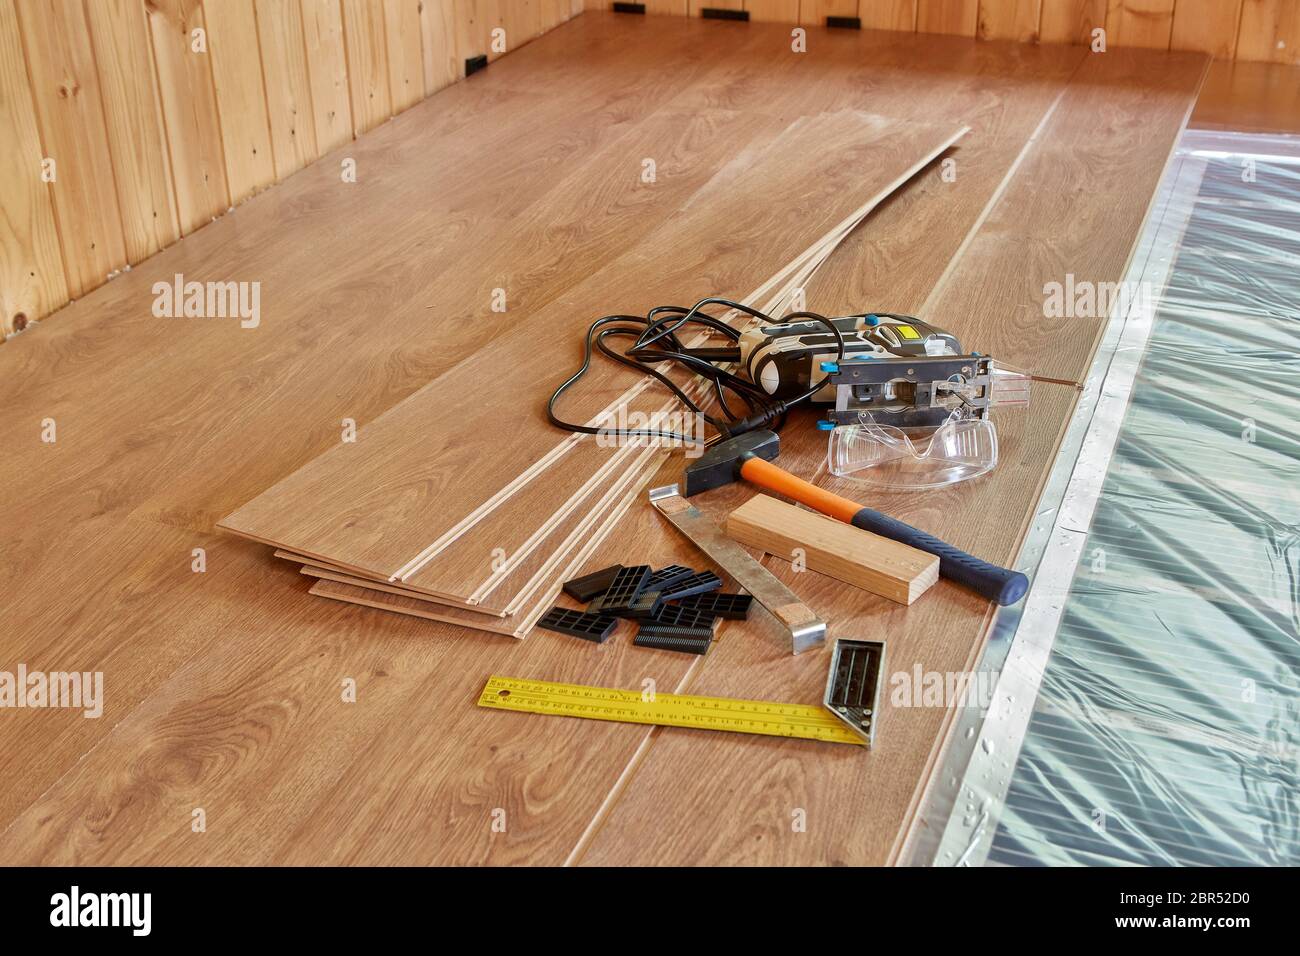 Installation Infrared Carbon Heating Film For Floor Installing Finished Laminate Floor On A Heat Insulated Floor Electrical Floor Heating System R Stock Photo Alamy